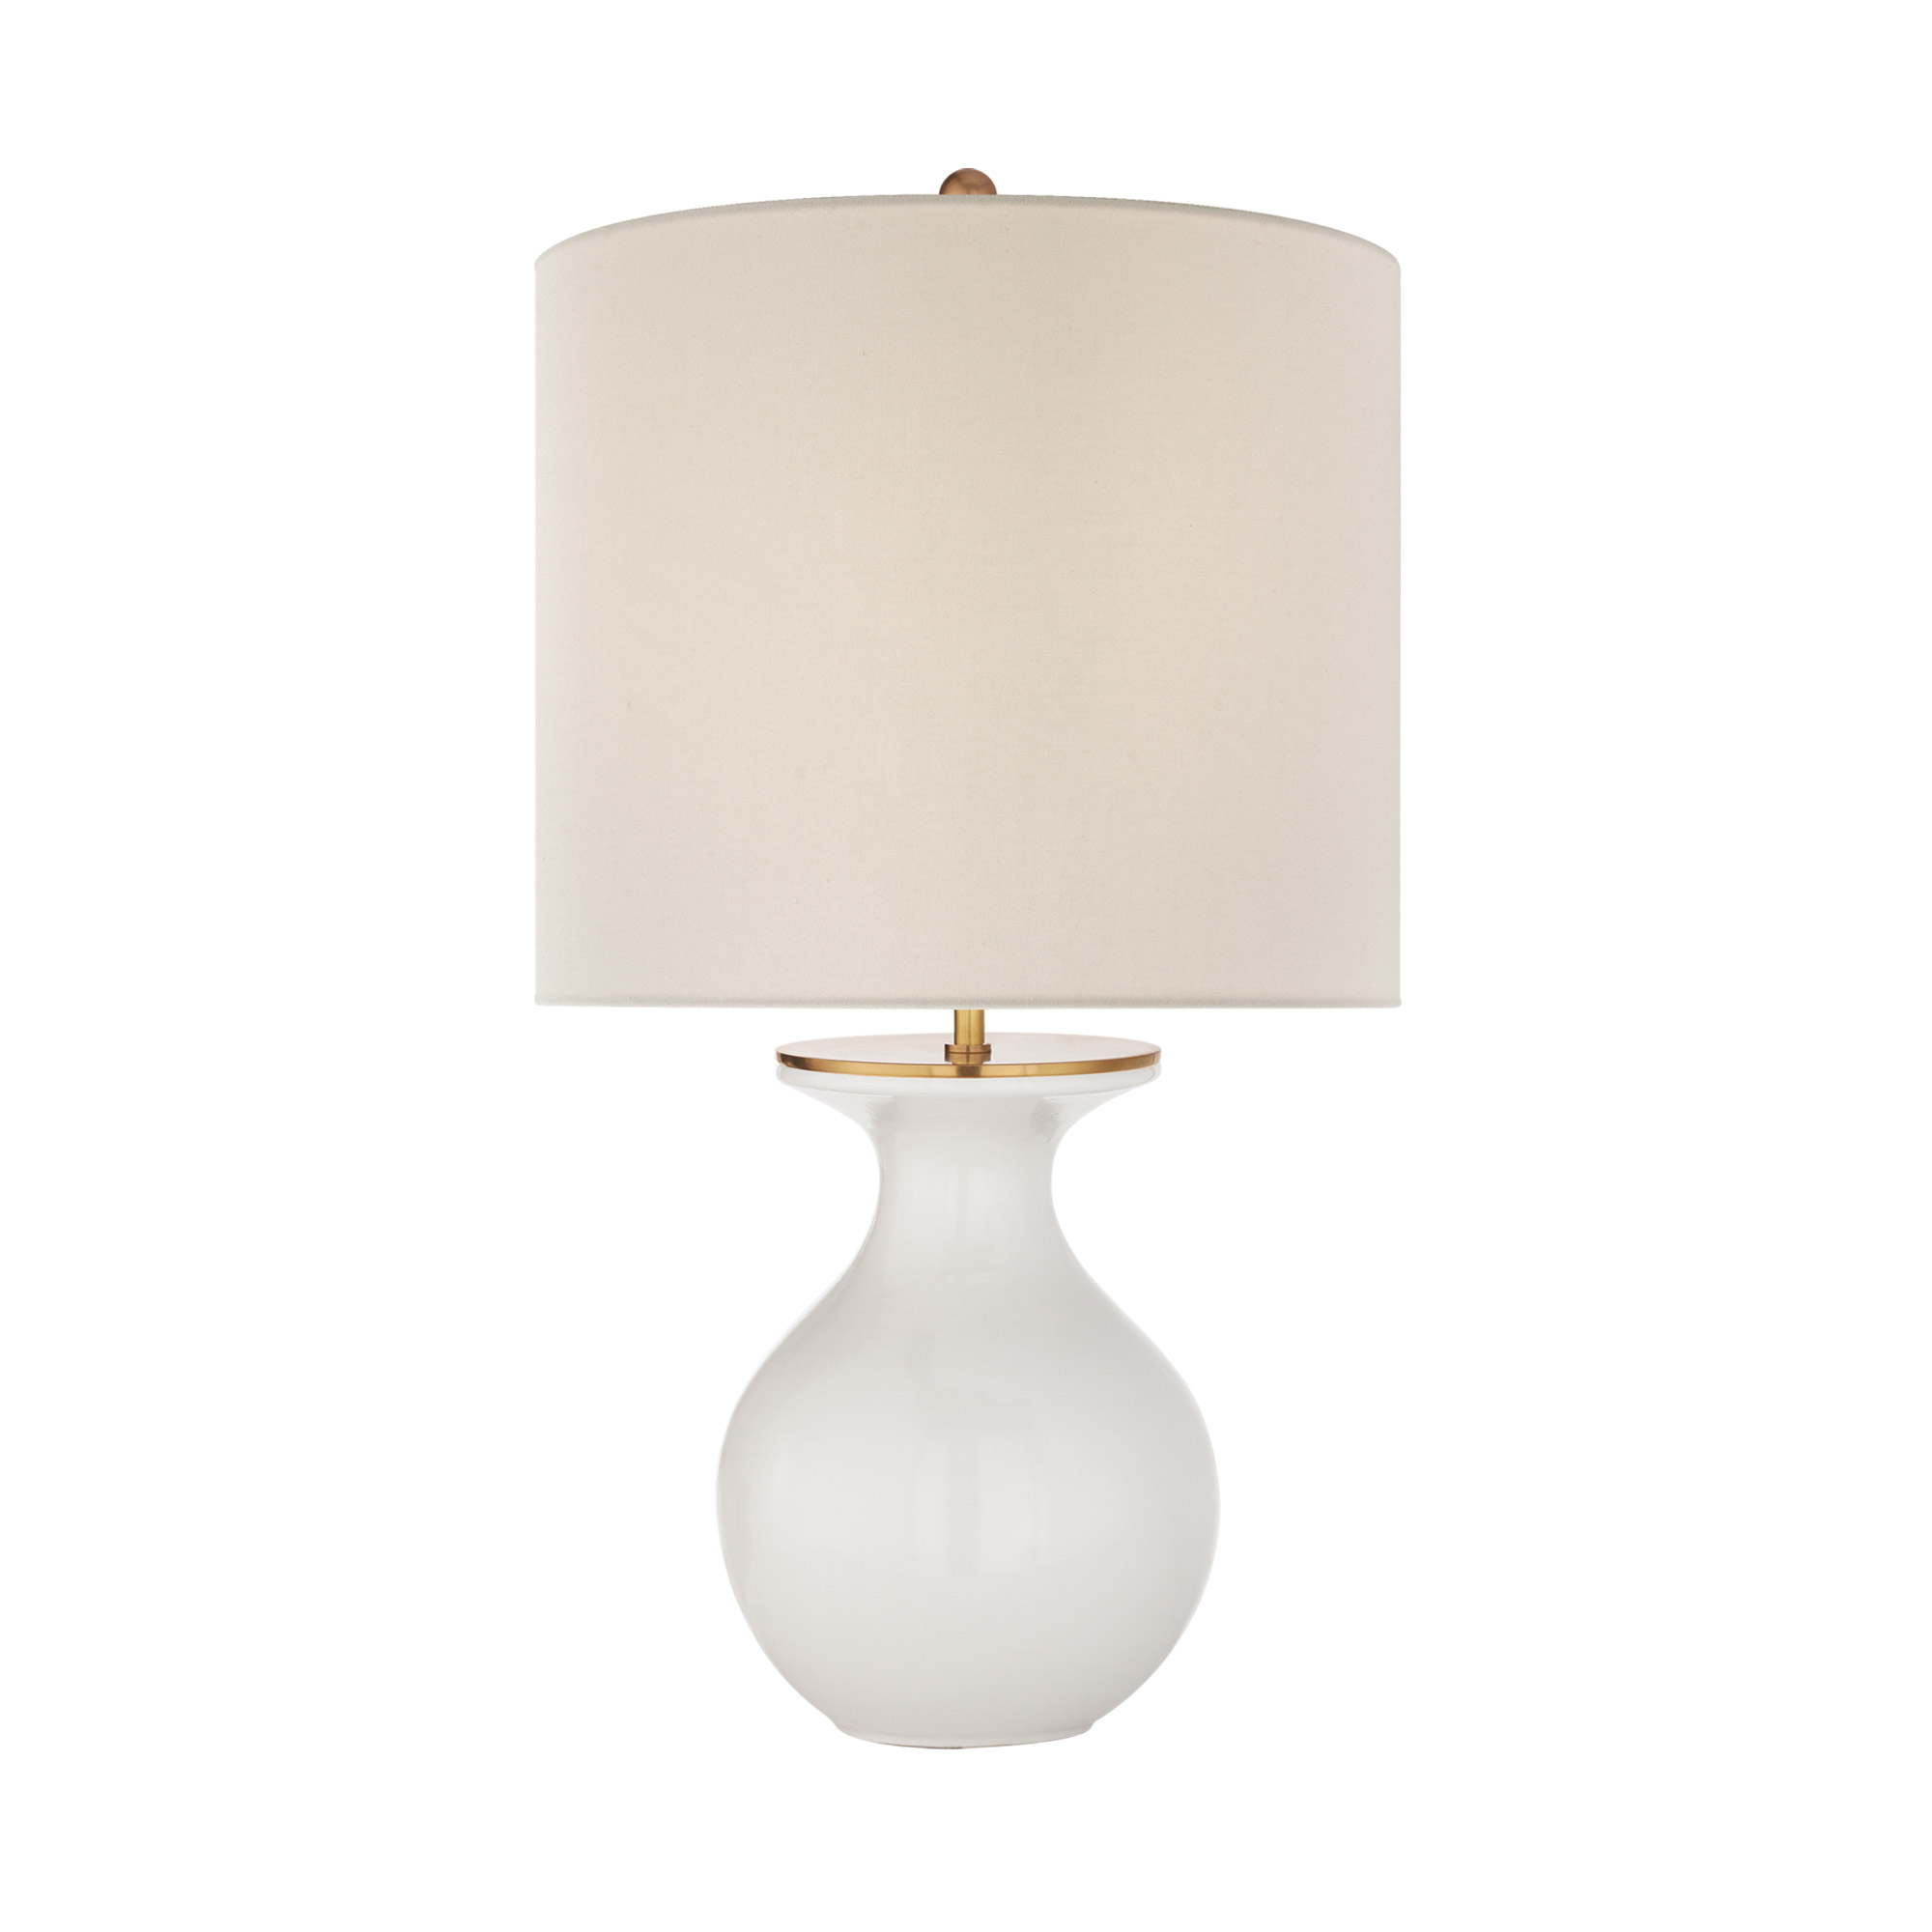 Albie Small Table Lamp - Kate Spade